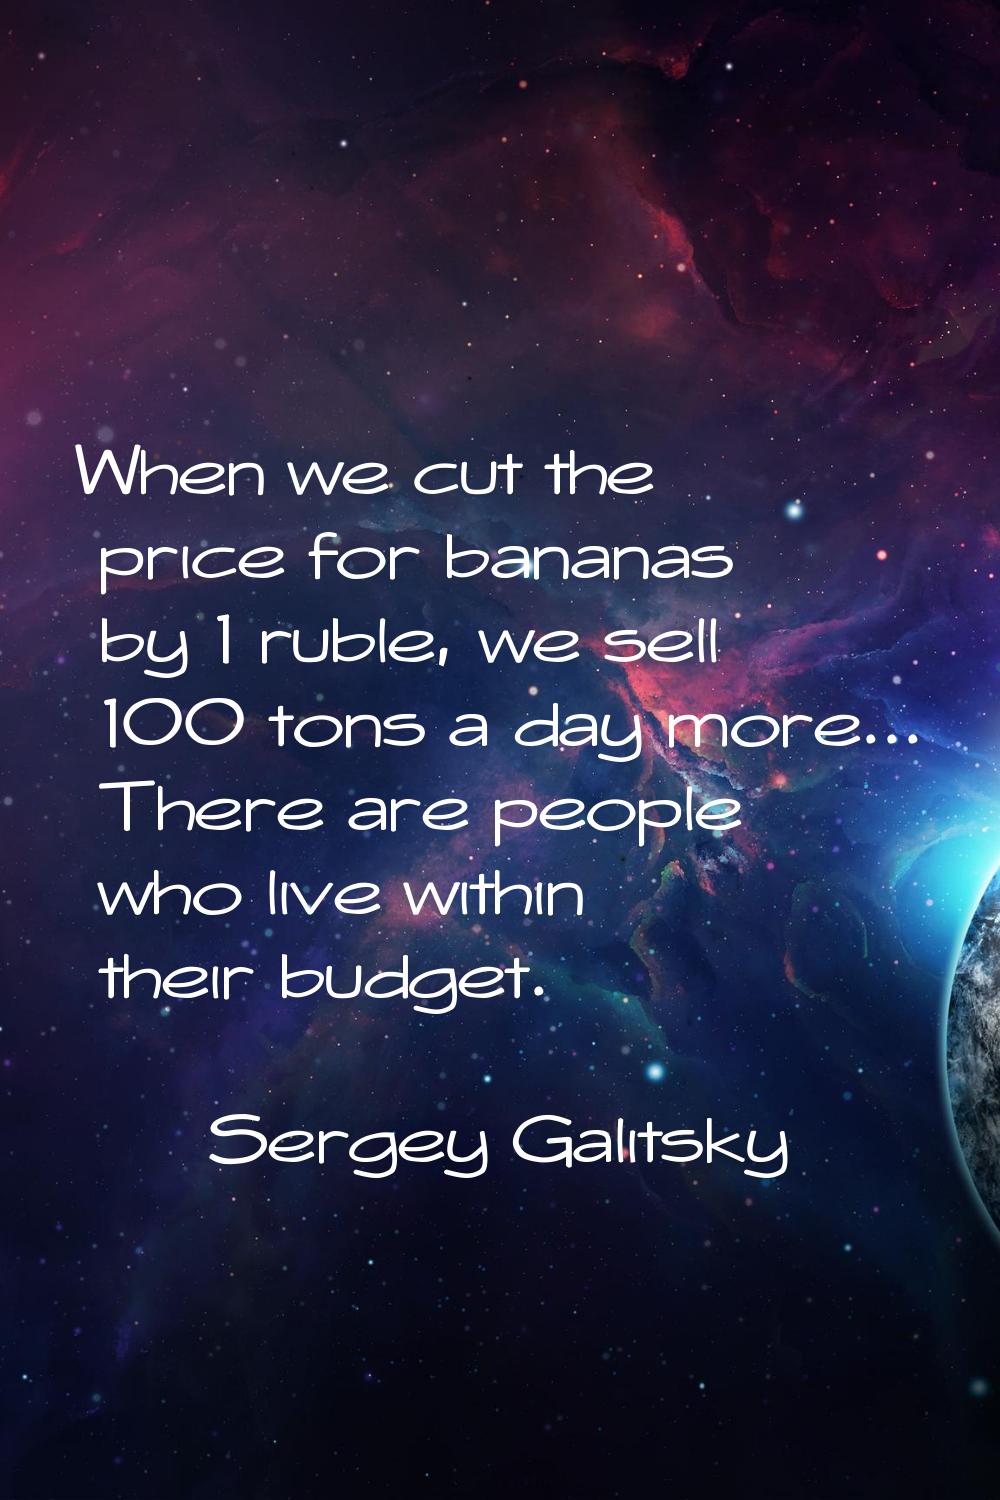 When we cut the price for bananas by 1 ruble, we sell 100 tons a day more... There are people who l